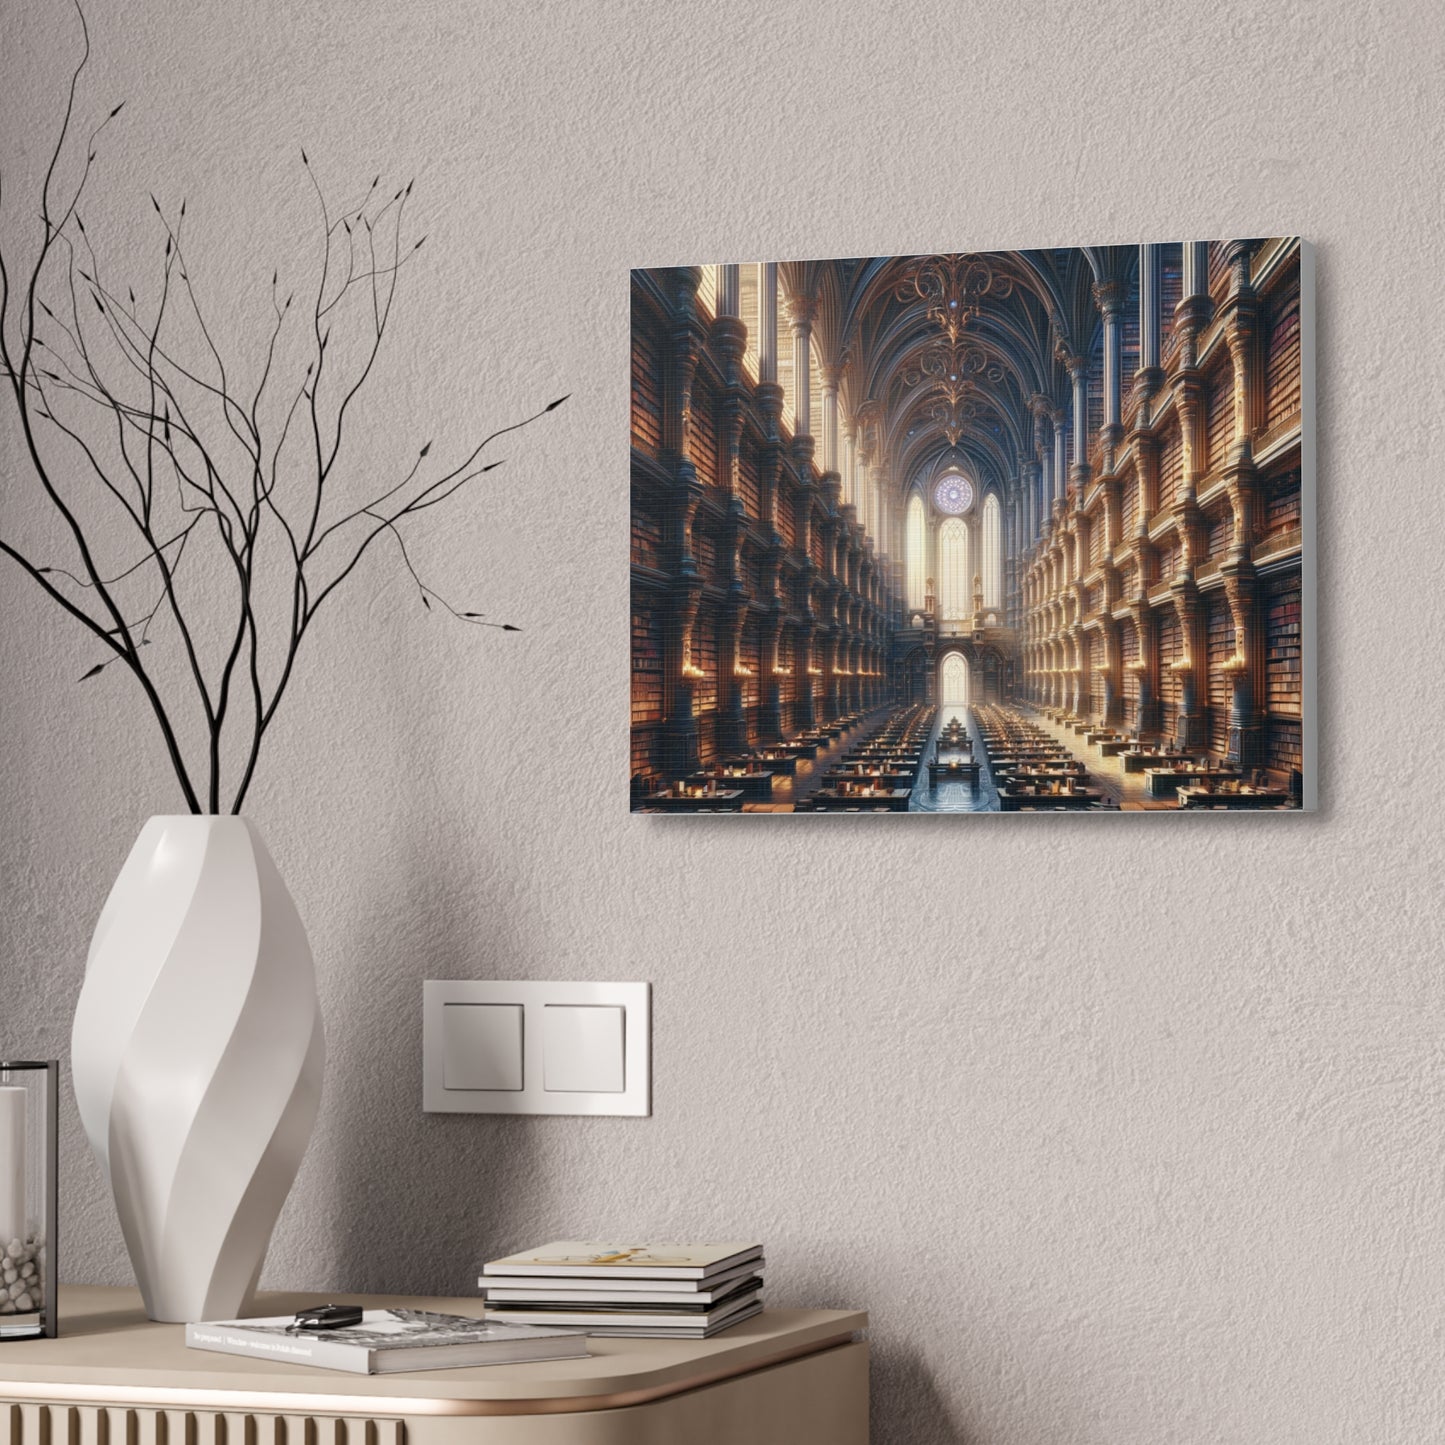 Sanctuary of Knowledge: Grand Fantastical Library Canvas Art